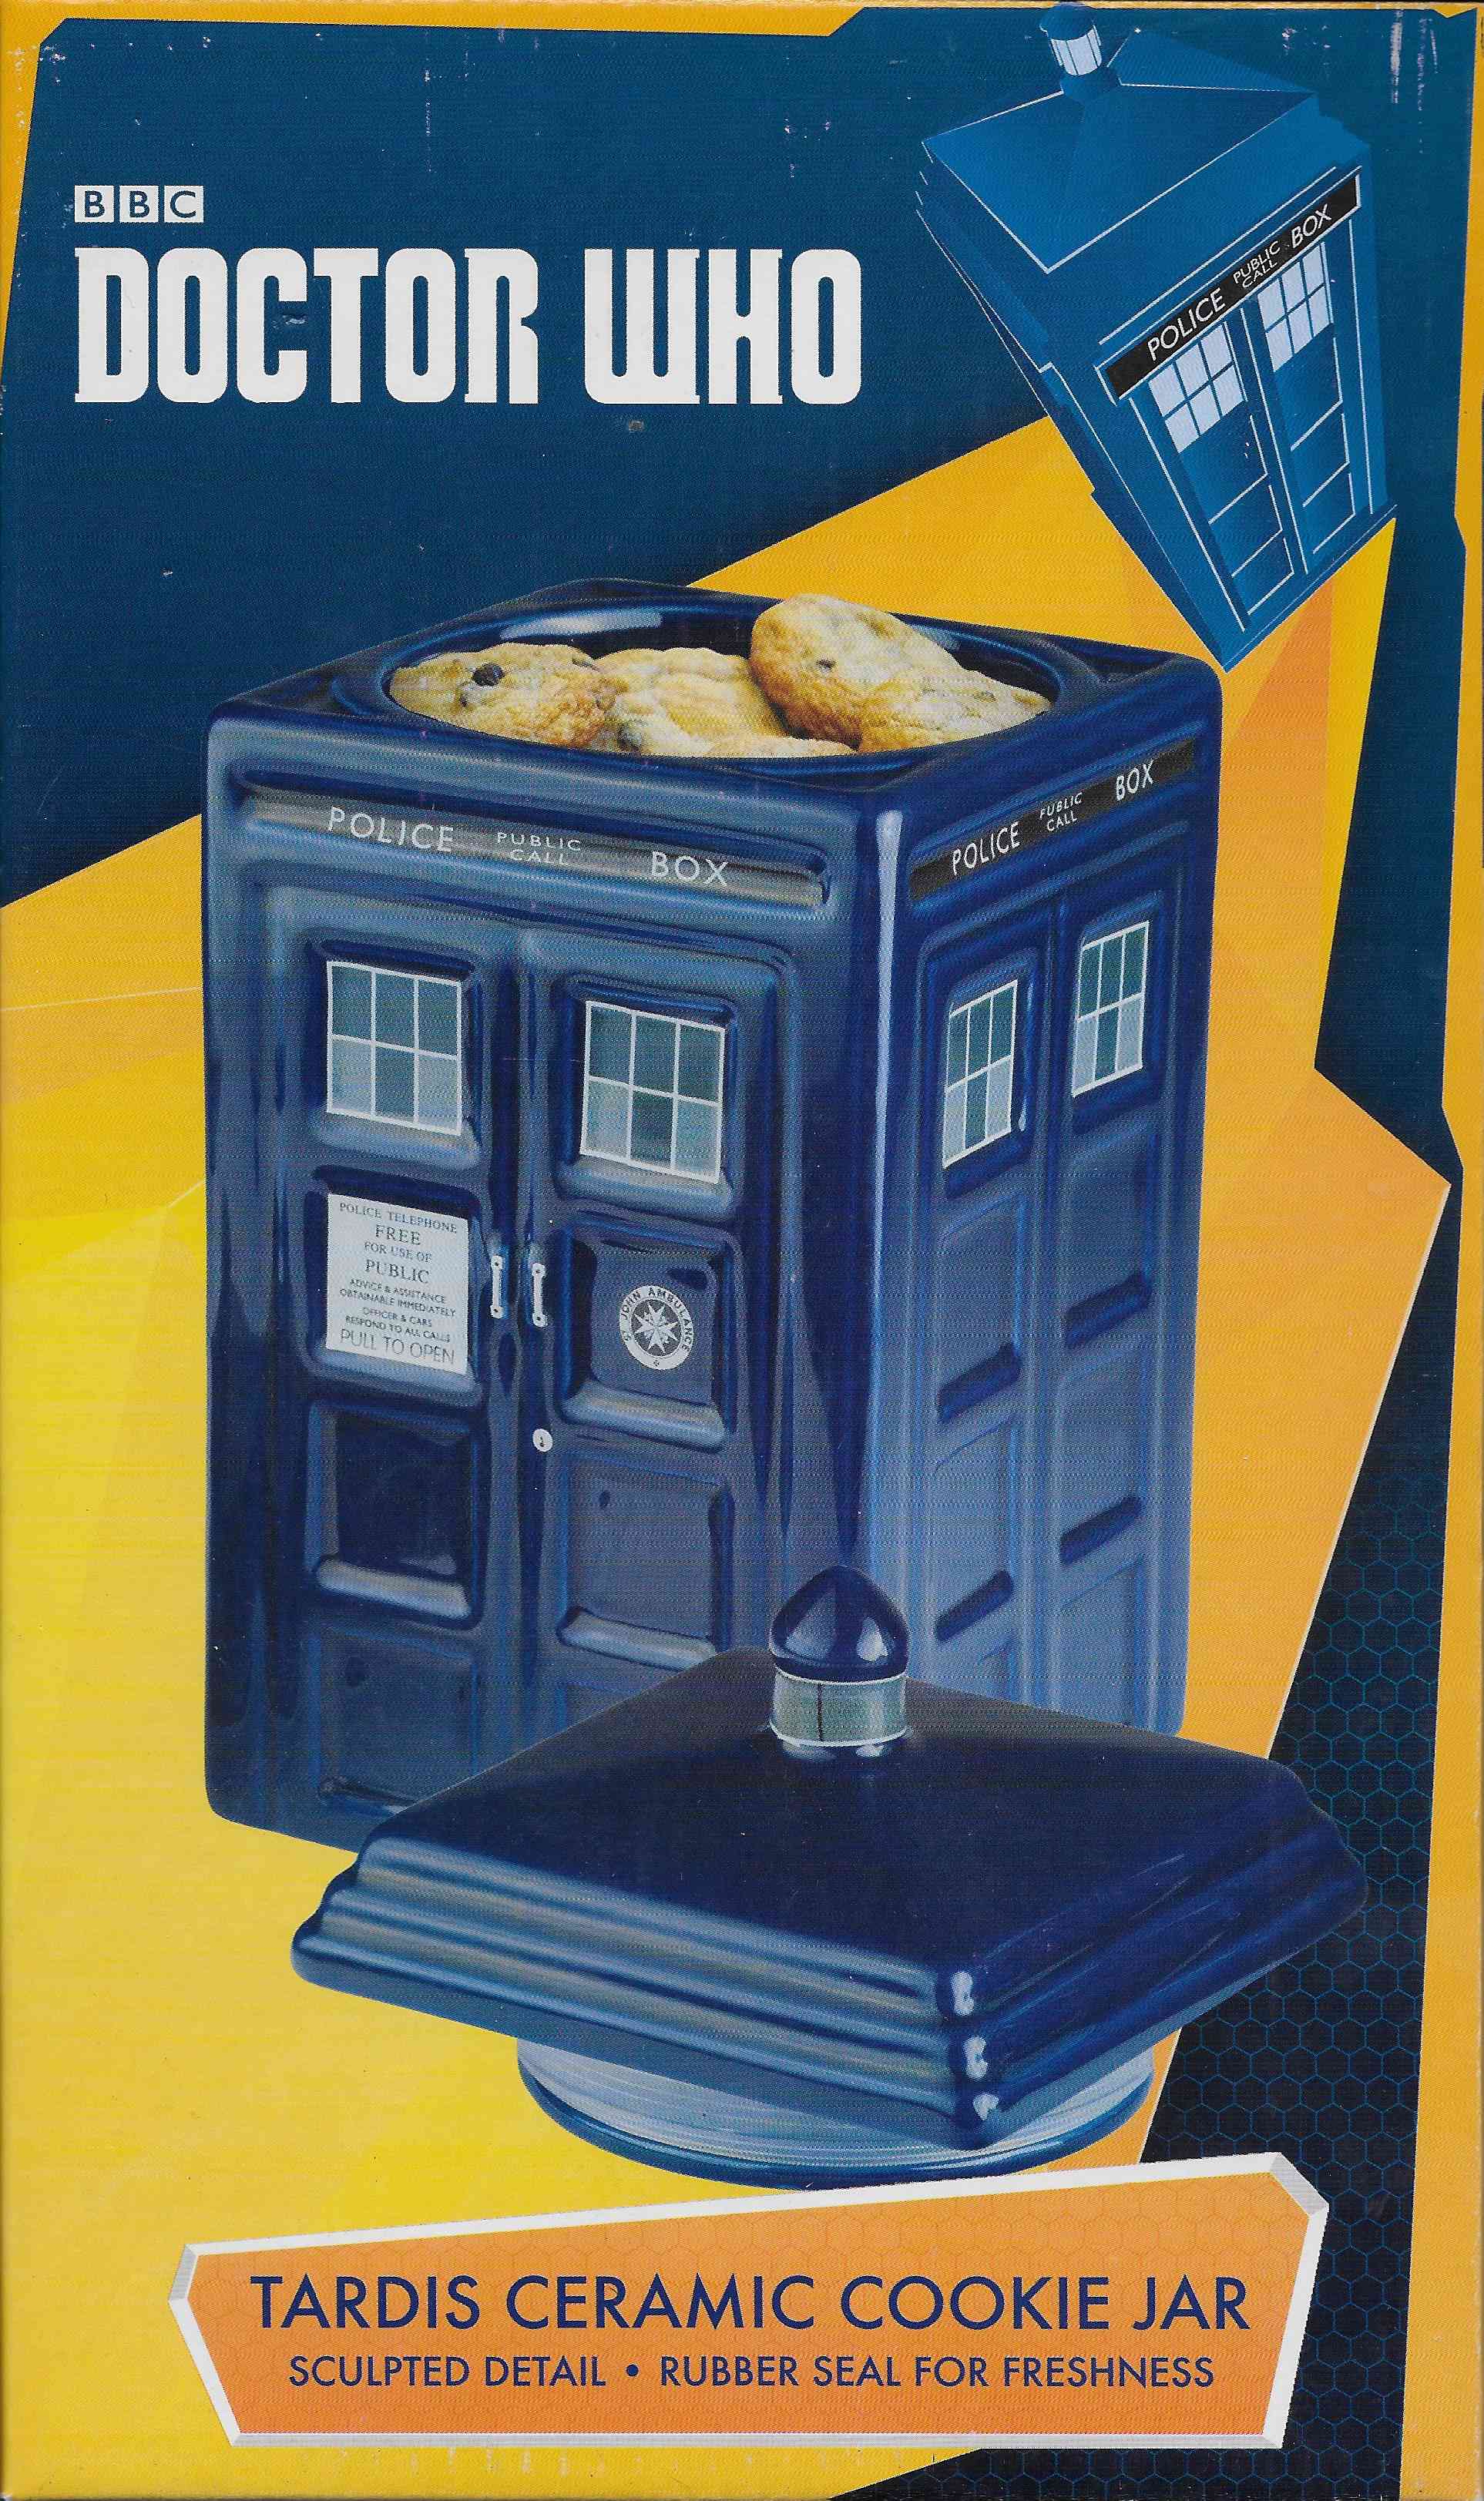 Picture of DW-TCCJ Doctor Who - TARDIS ceramic cookie jar by artist Unknown from the BBC records and Tapes library